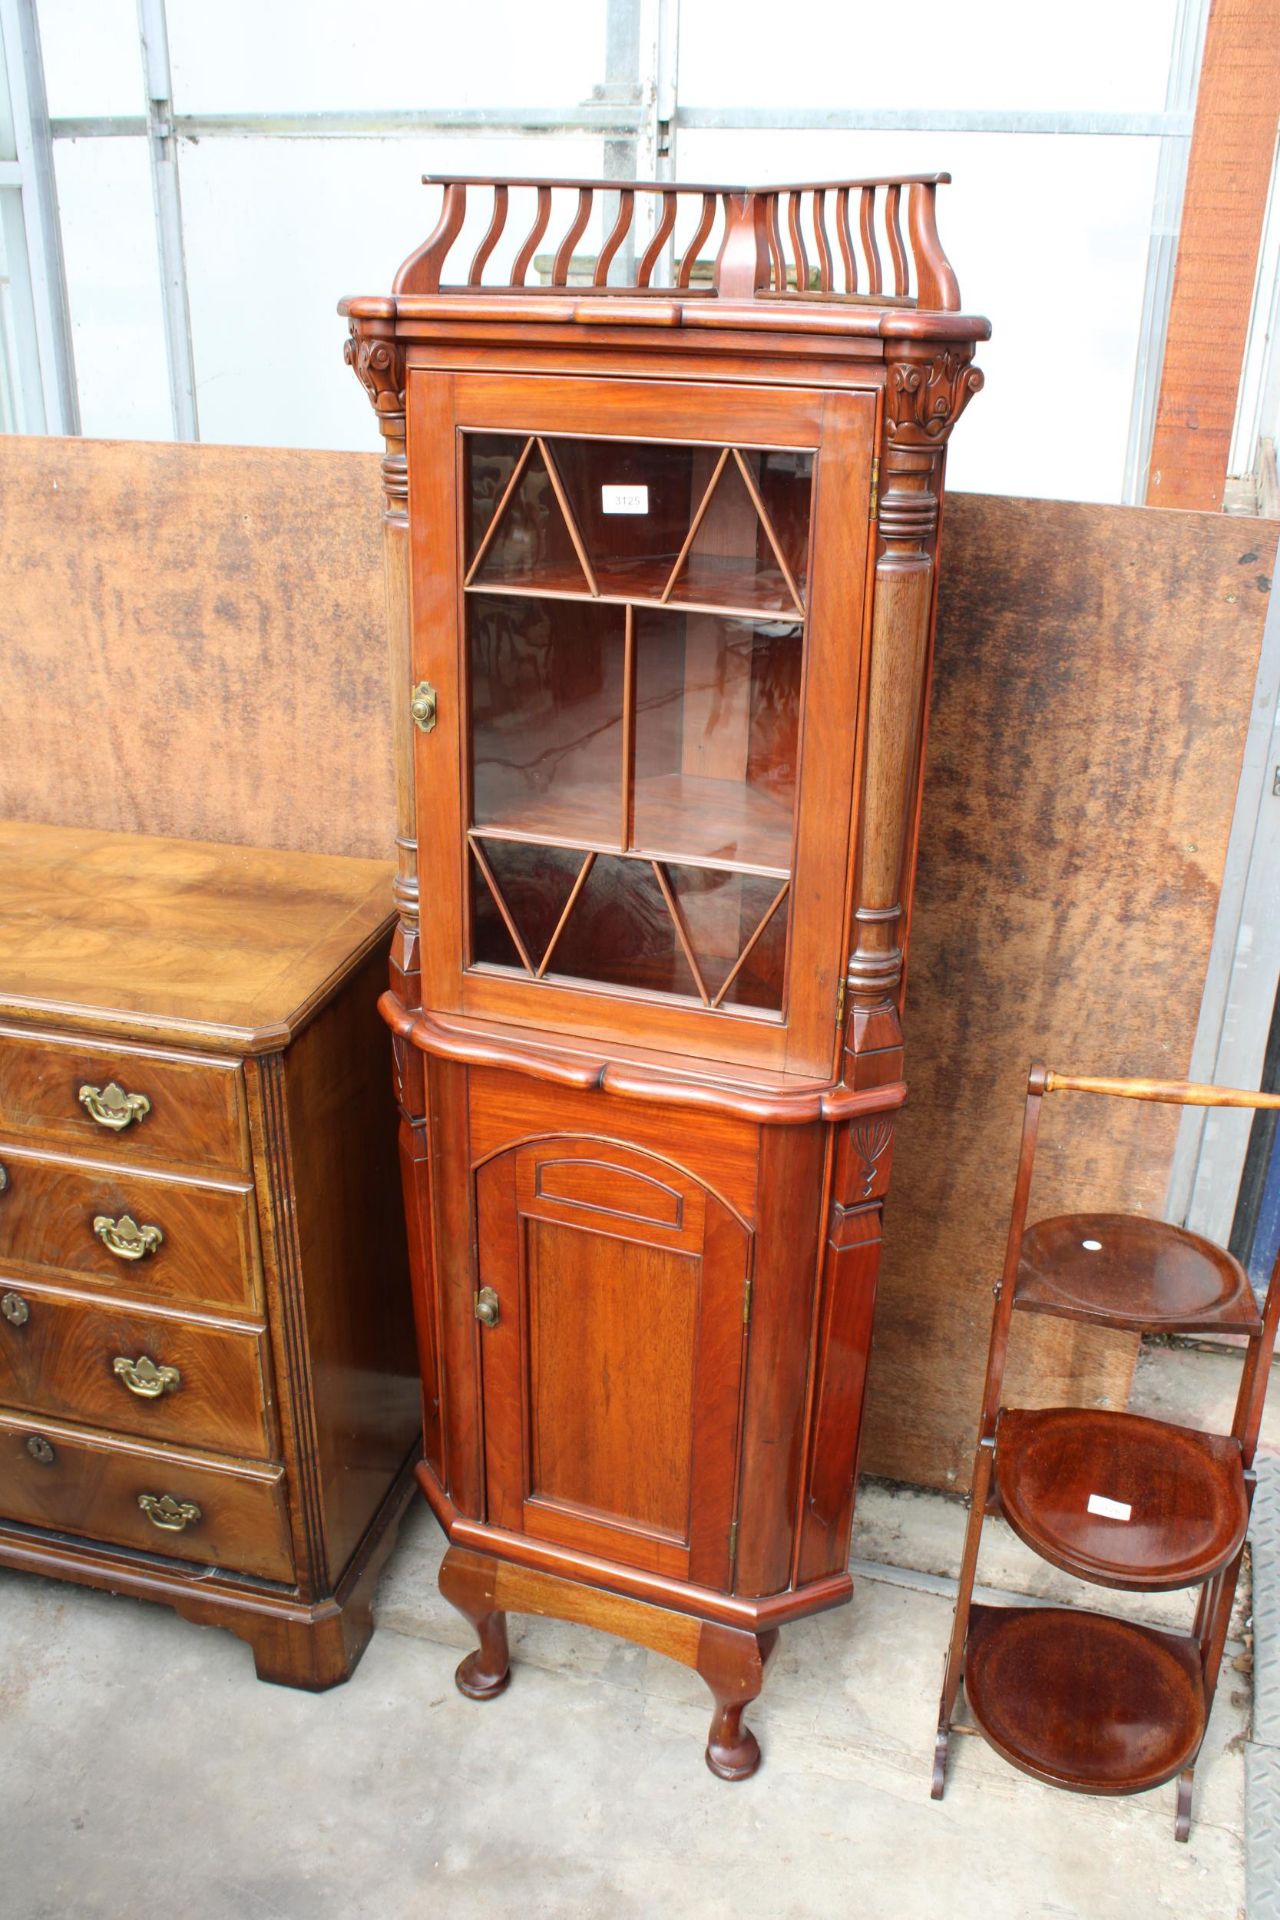 A 19TH CENTURY STYLE MAHOGANY GLAZED CORNER CUPBOARD WITH GALLERIED TOP, THE BASE ENCLOSING PULL OUT